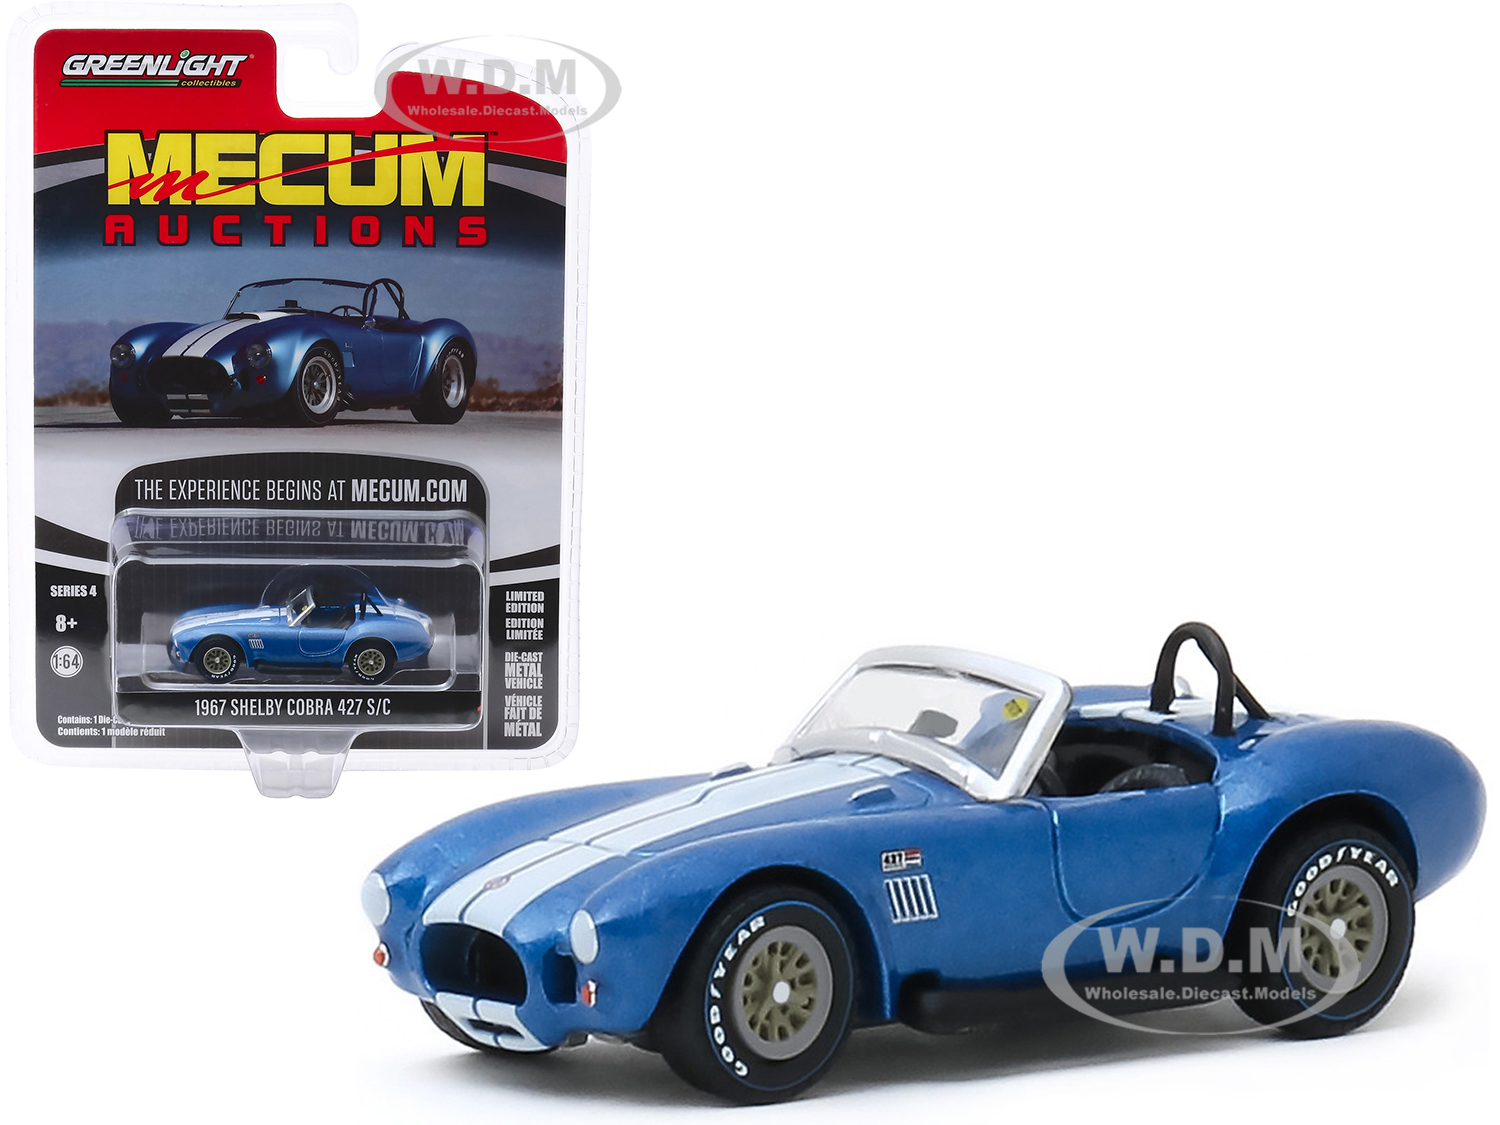 1967 Shelby Cobra 427 S/c Roadster Blue Metallic With White Stripes (indianapolis 2019) "mecum Auctions Collector Cars" Series 4 1/64 Diecast Model C